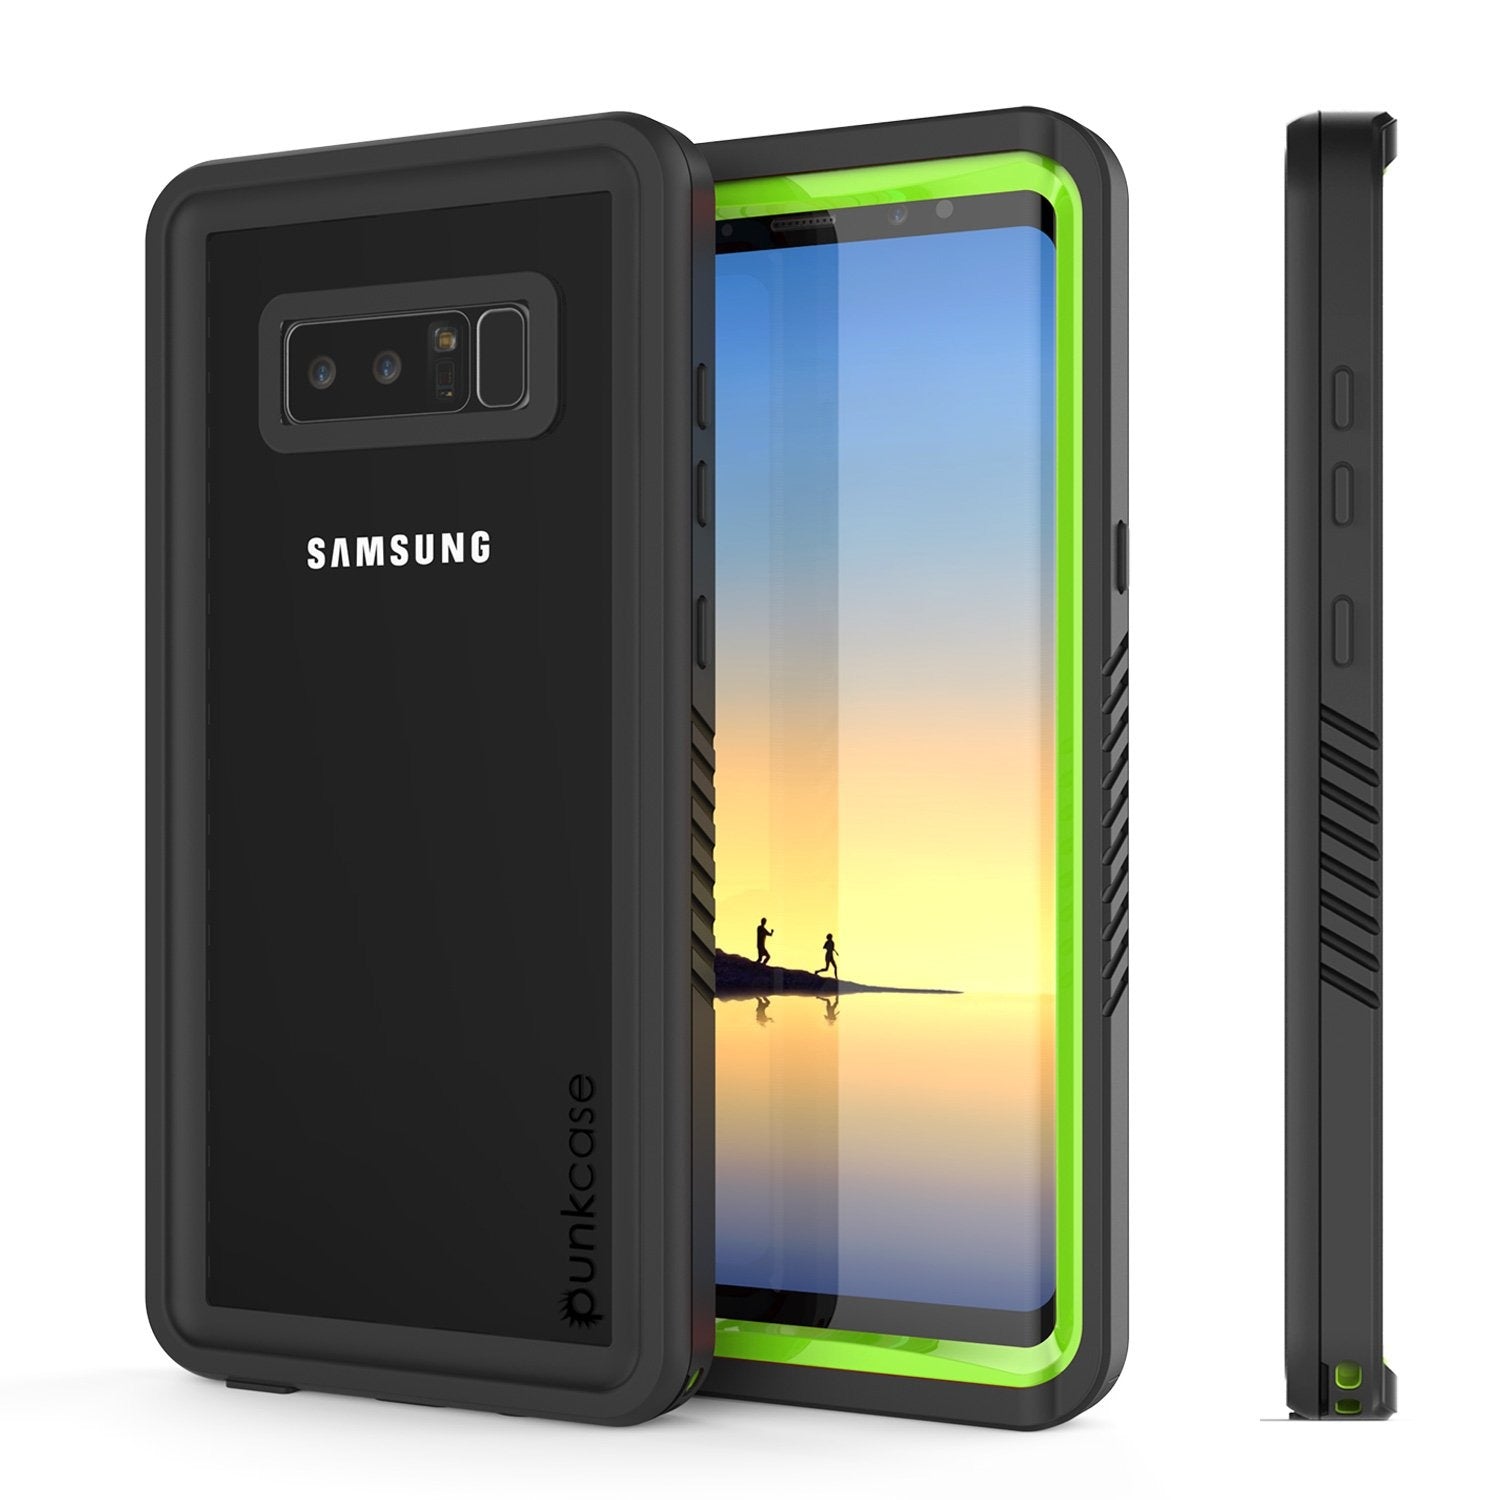 Galaxy Note 8 Case, Punkcase [Extreme Series] [Slim Fit] [IP68 Certified] [Shockproof] Armor Cover W/ Built In Screen Protector [Light Green] (Color in image: Light green)